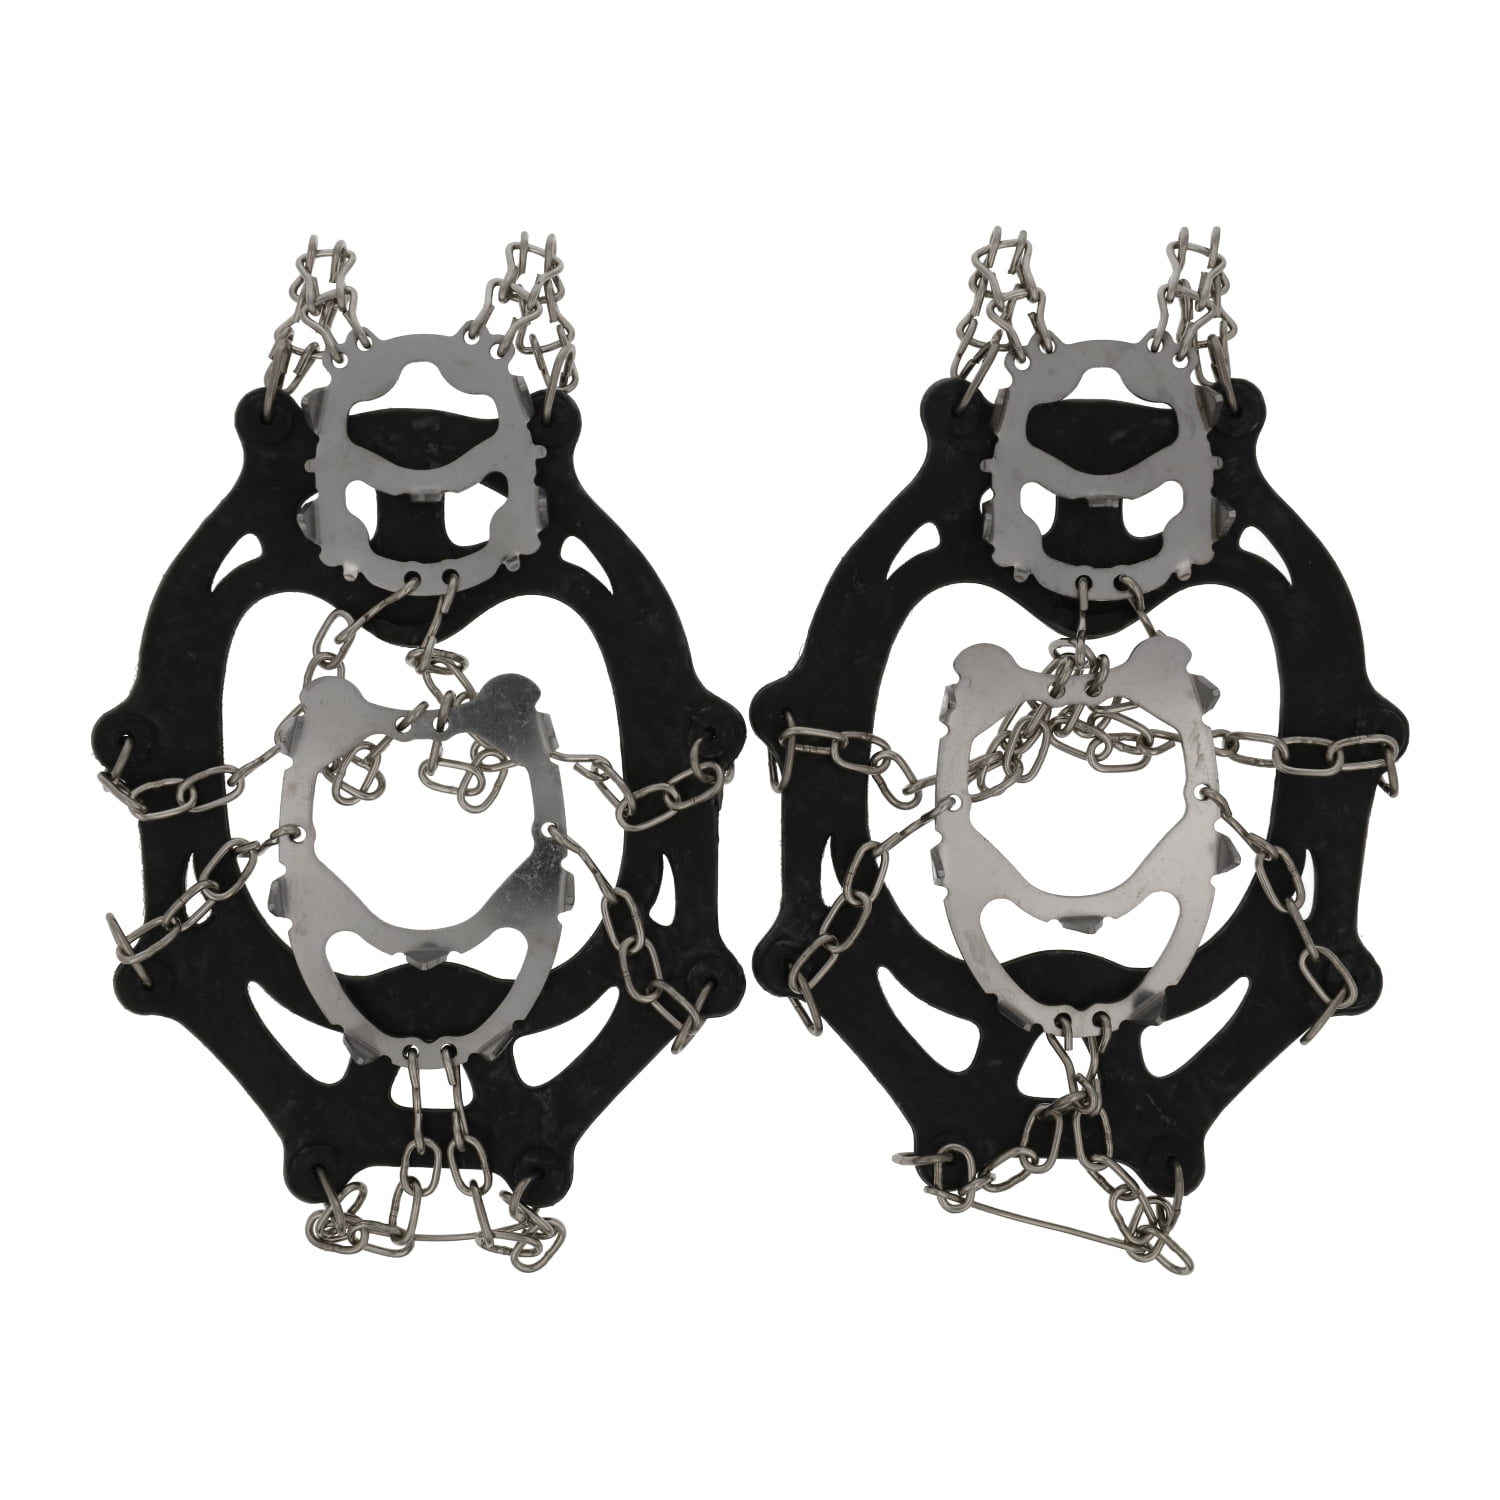 Eagle Claw Stainless Steel Chain Ice Cleats